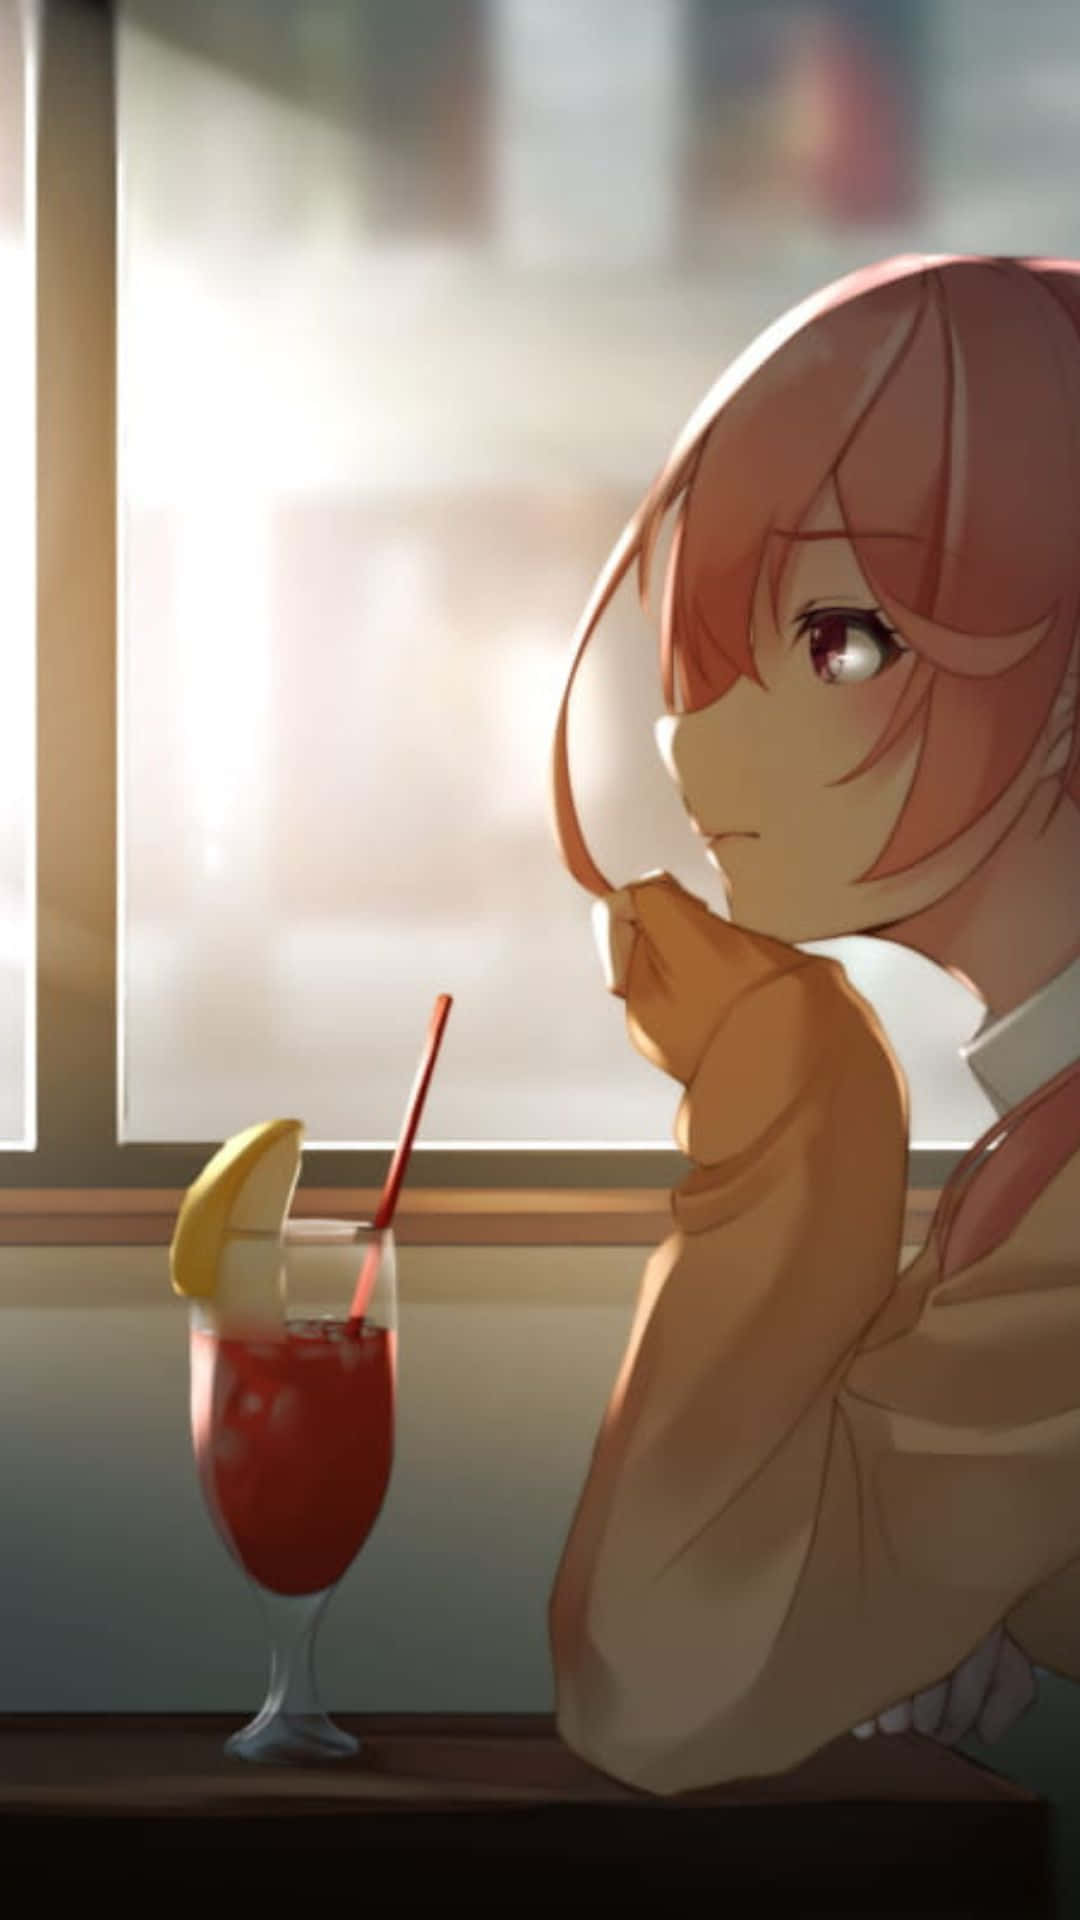 Anime Girl Drinking Juice In Cafe Background